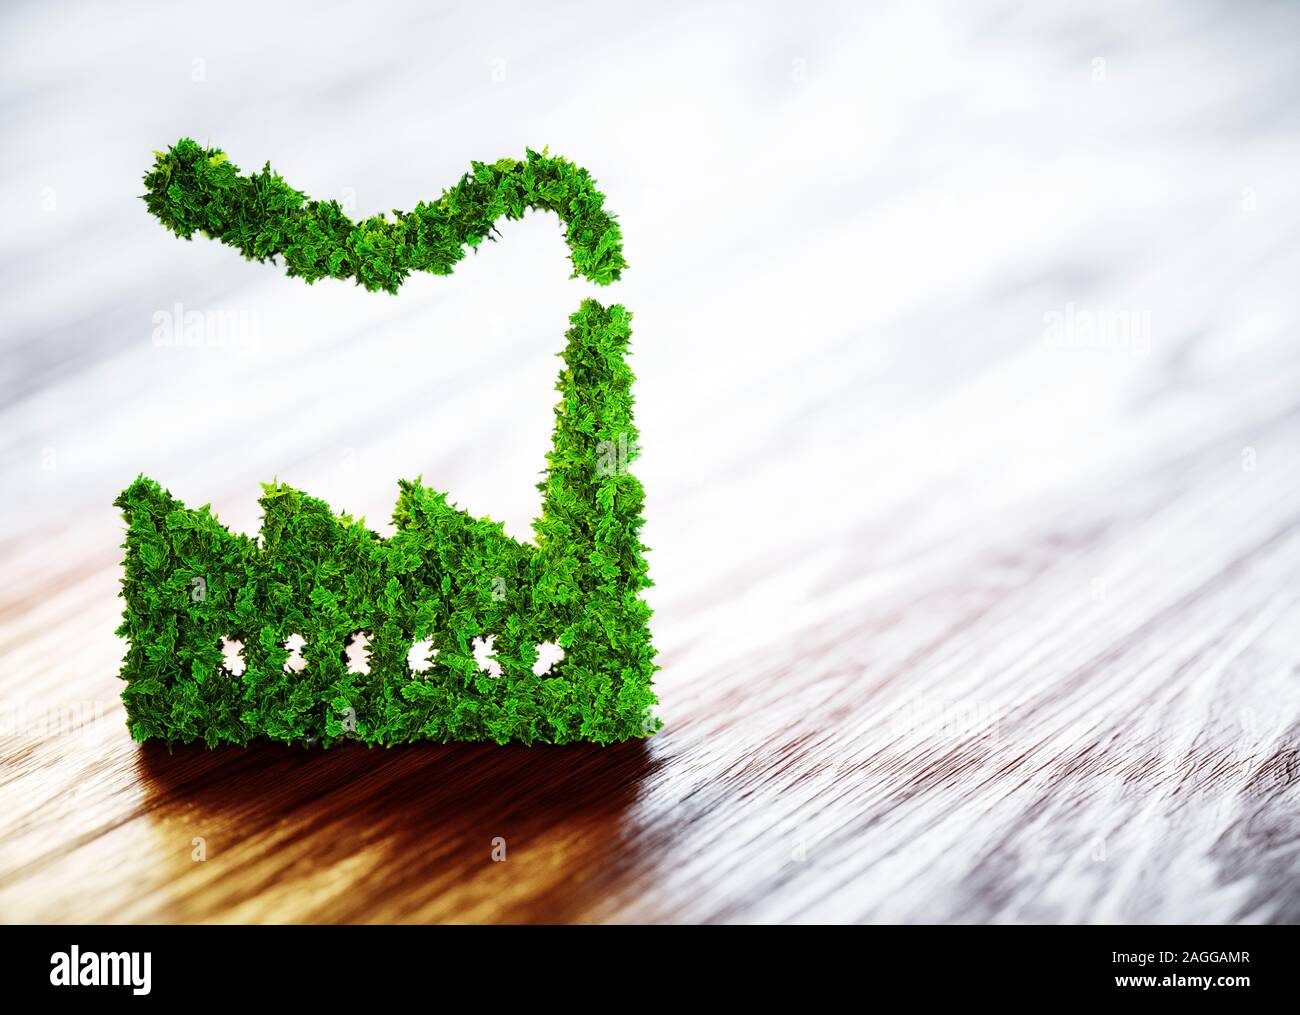 Ecology industry concept. 3D illustration on wooden background. Stock Photo